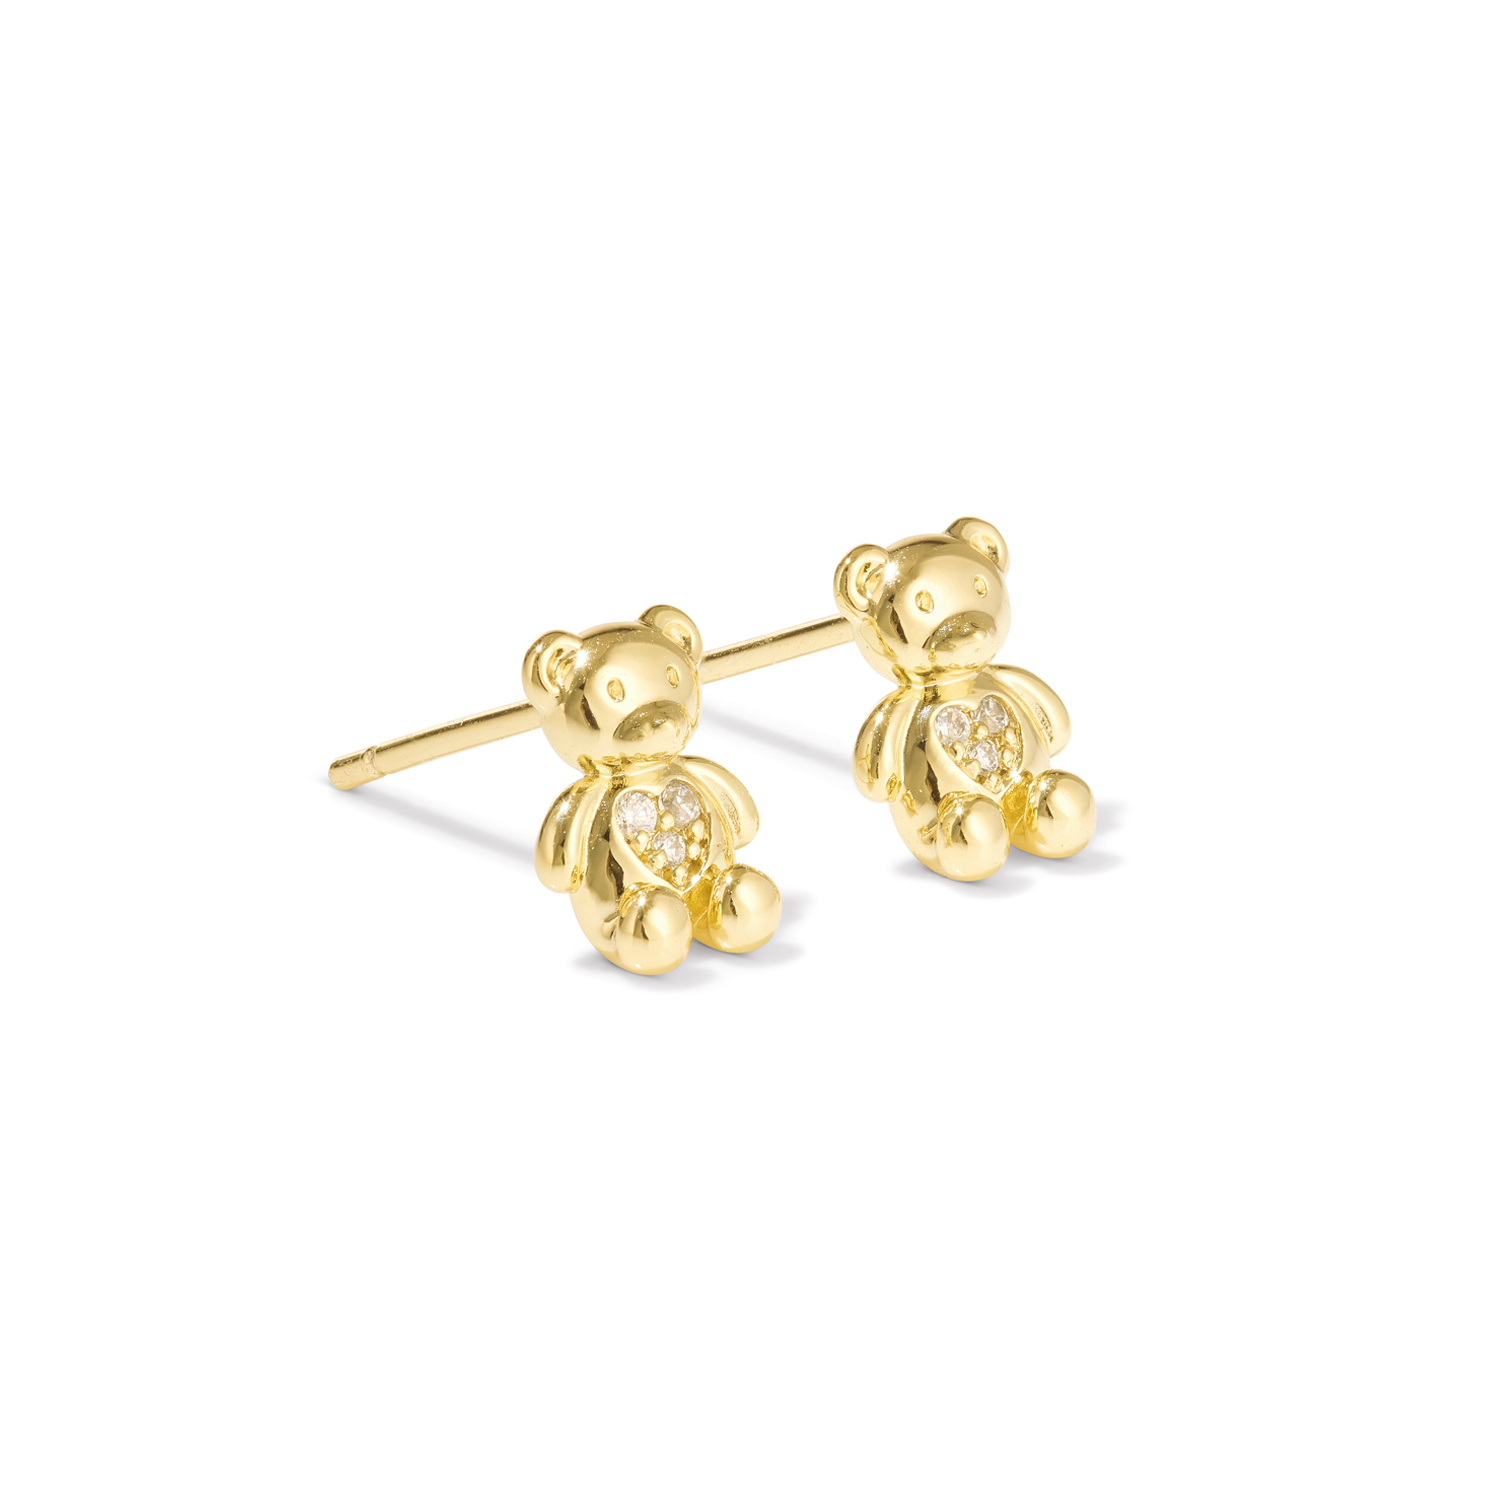 Adorable and dainty earrings in gold with cubic zirconia